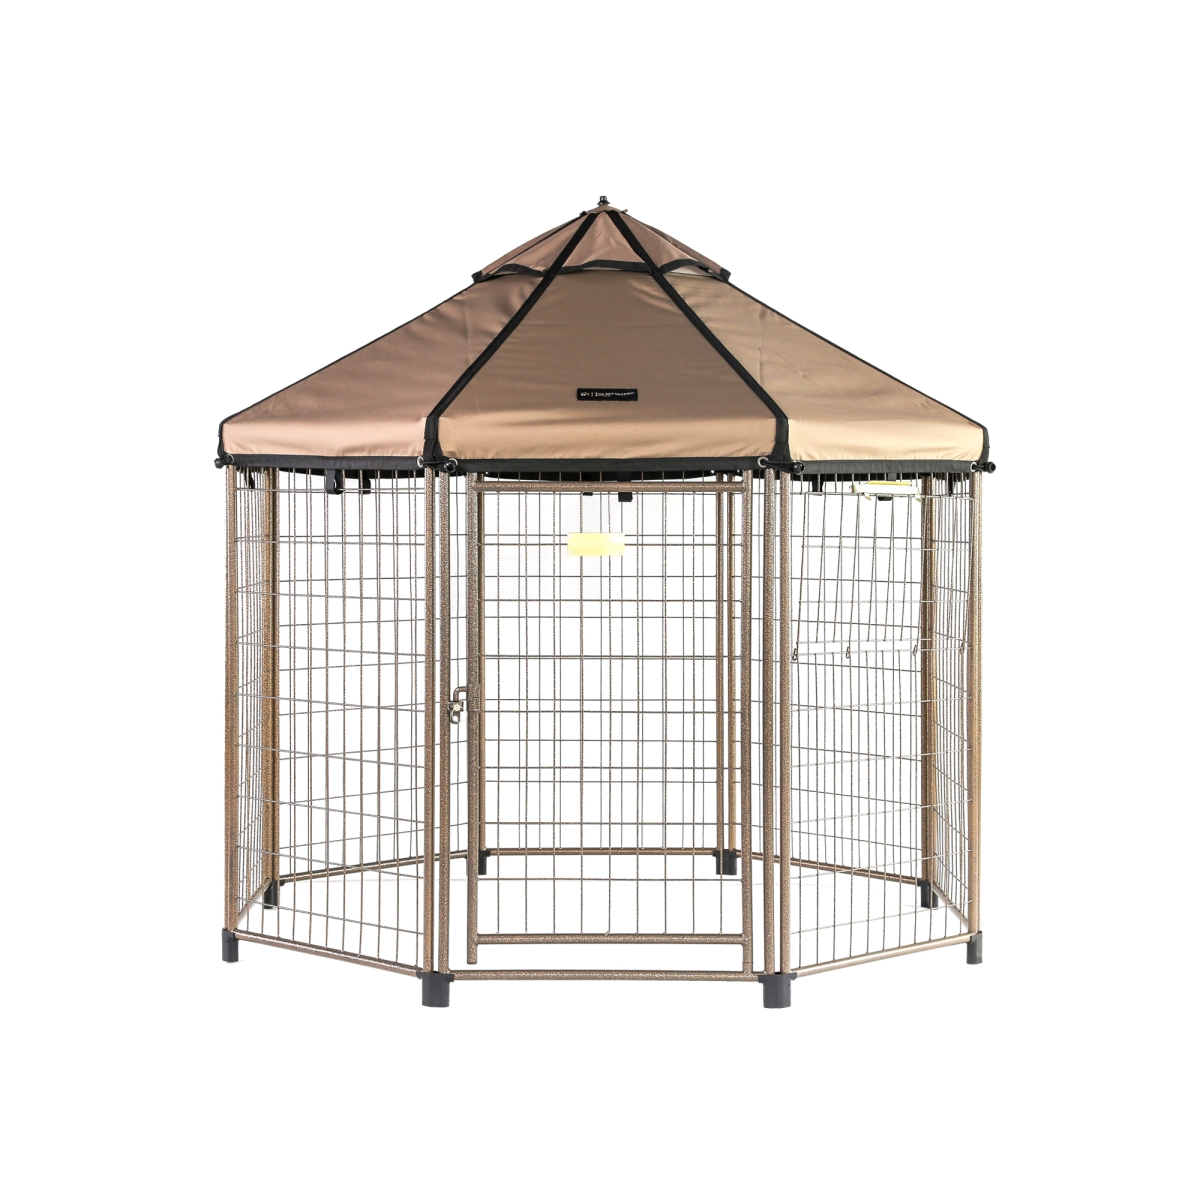 Picture of Pet Gazebo 23405ET 5 ft. Pet Gazebo with Earth Taupe Canopy